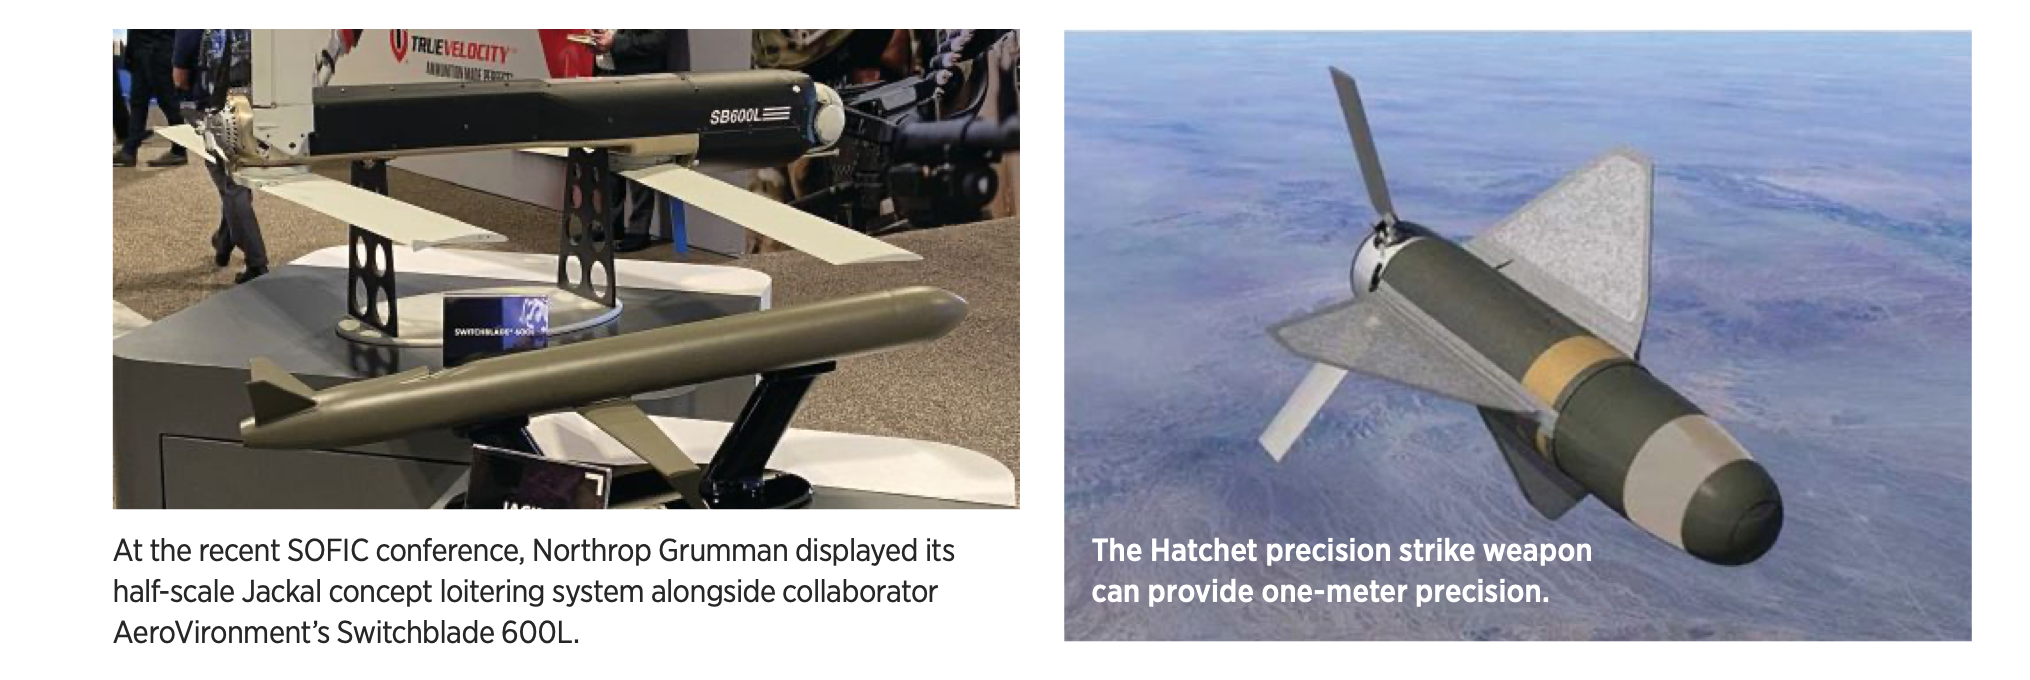 Day of the Jackal – Inside Unmanned Systems